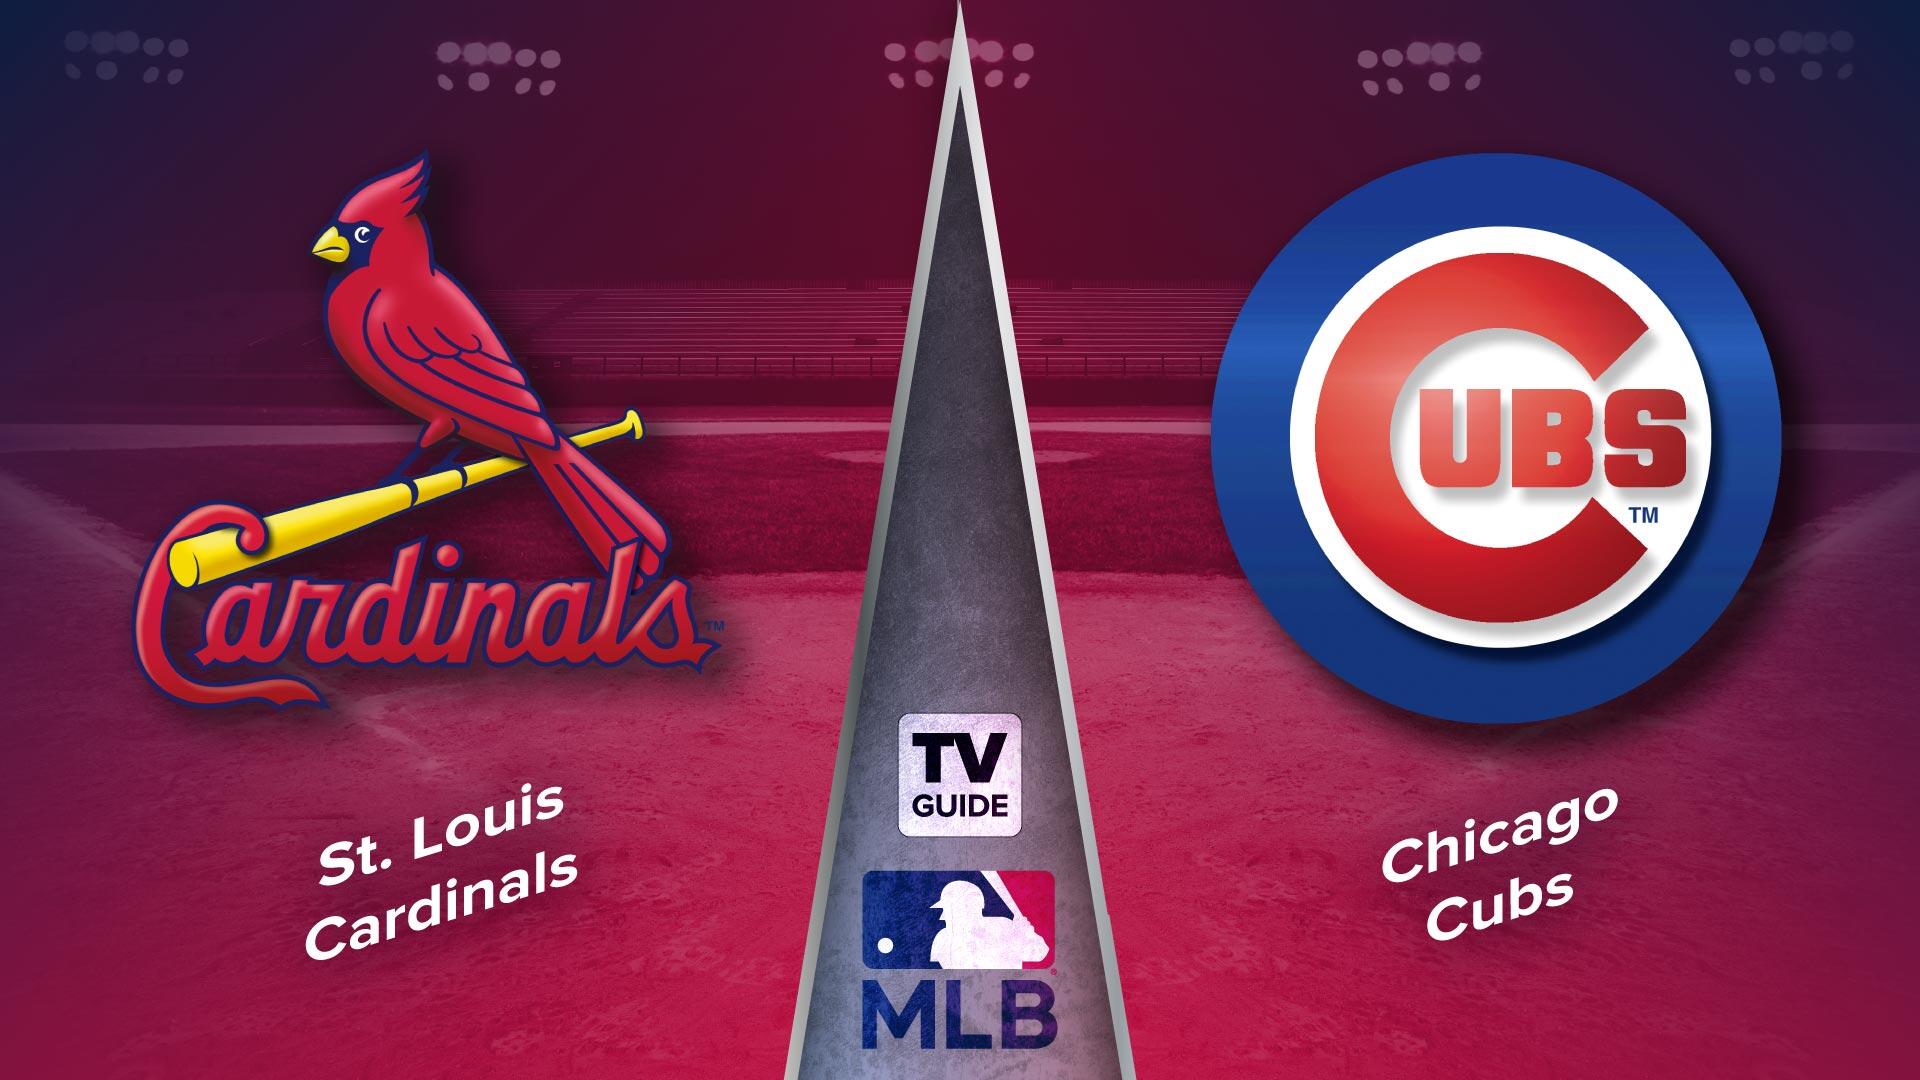 How to Watch St. Louis Cardinals vs. Chicago Cubs Live on Jul 20